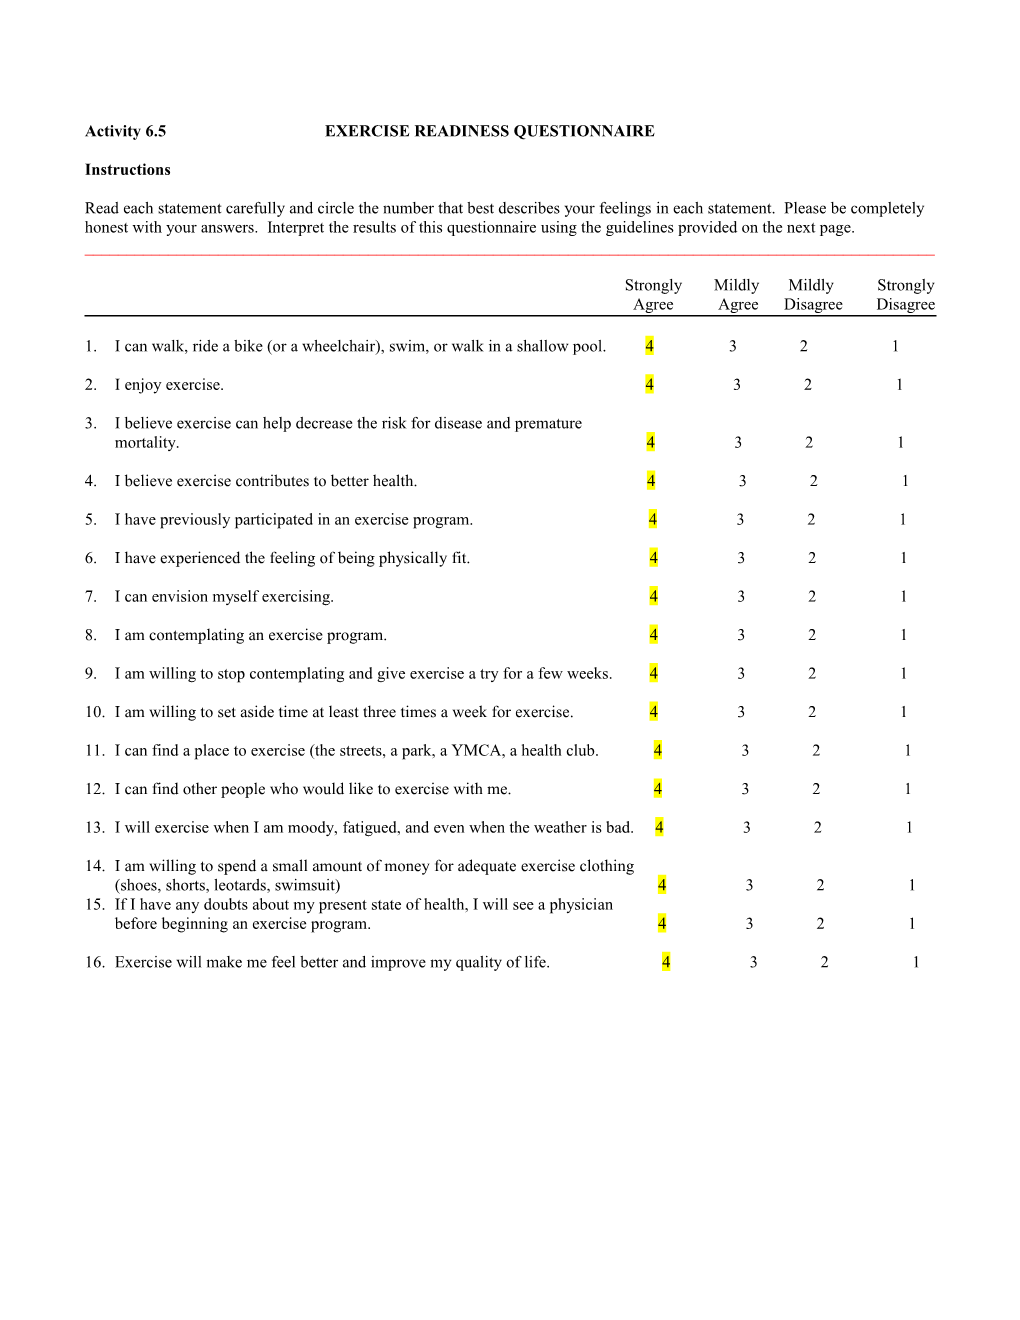 Activity 6.5EXERCISE READINESS QUESTIONNAIRE